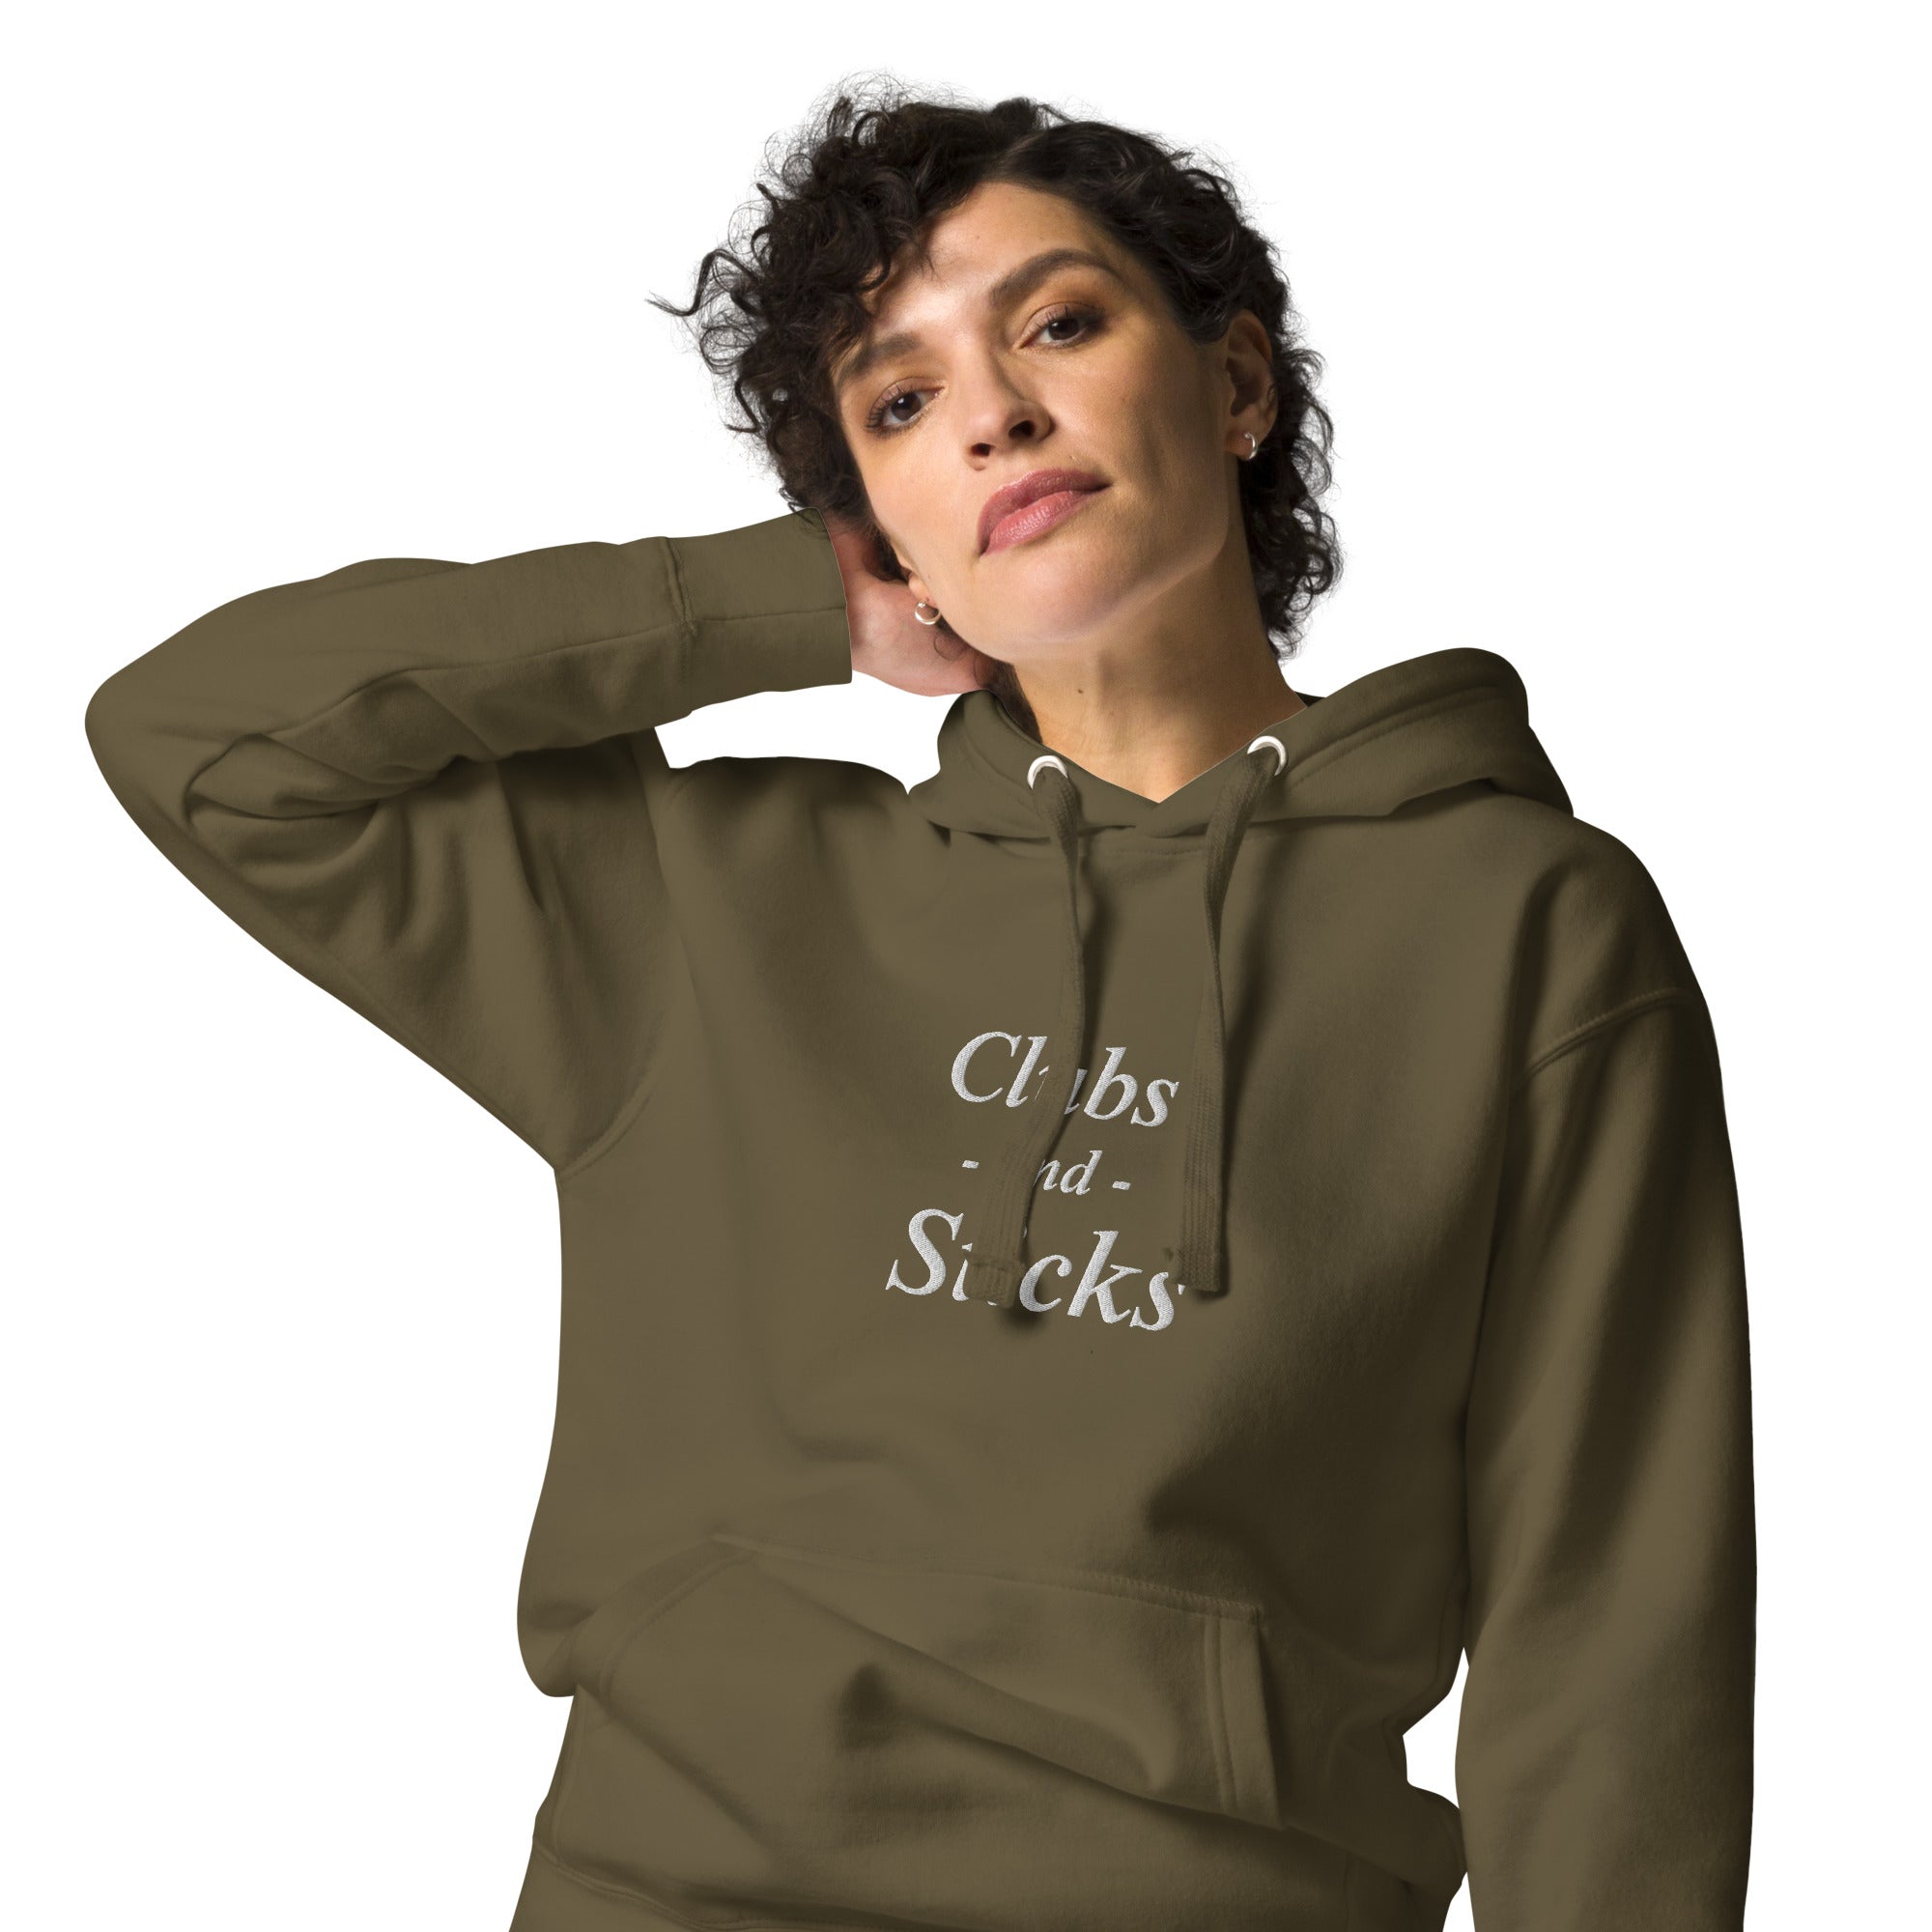 Clubs and Sticks Embroidered Hoodie